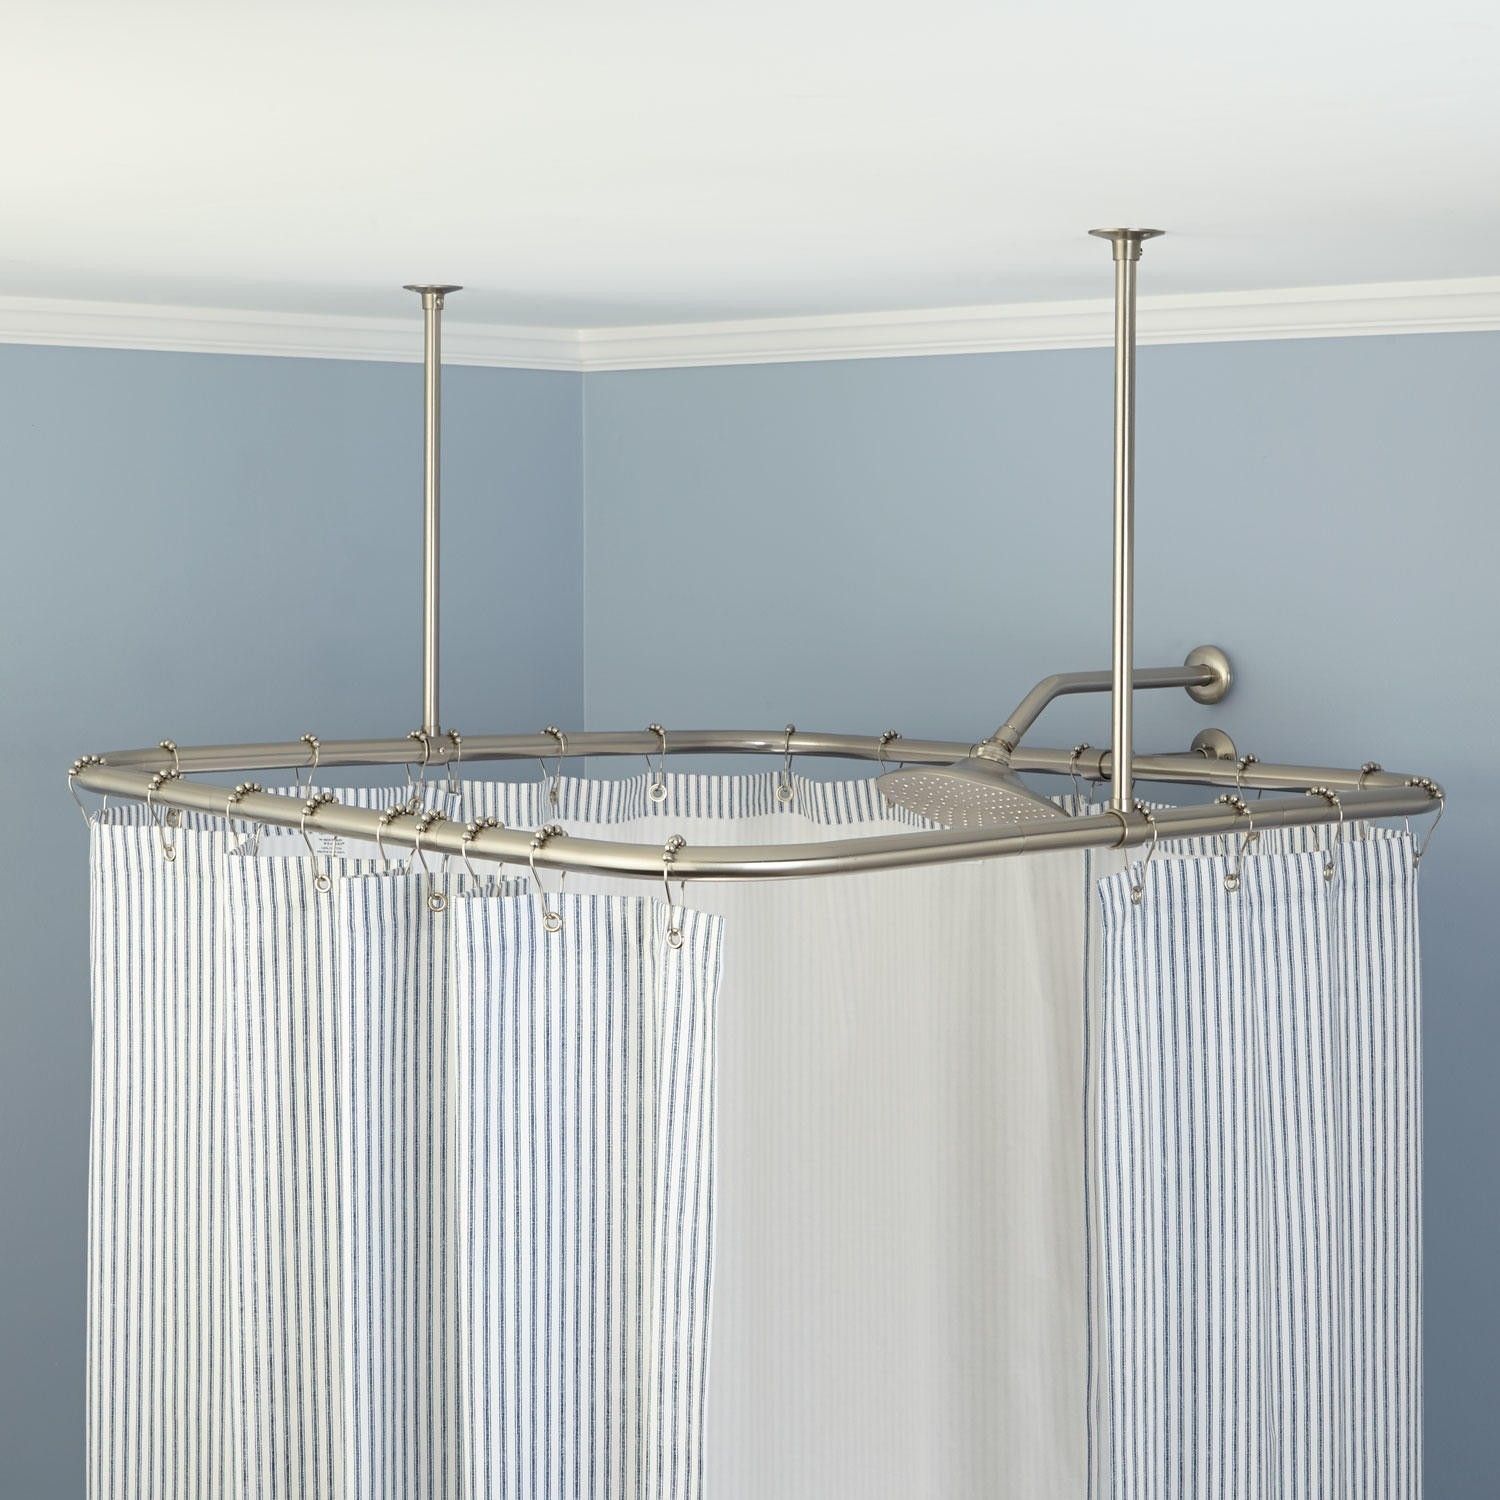 Shower Curtain Rods Ceiling Mounted Curtain Menzilperde With Shower Curtains Poles (View 24 of 25)